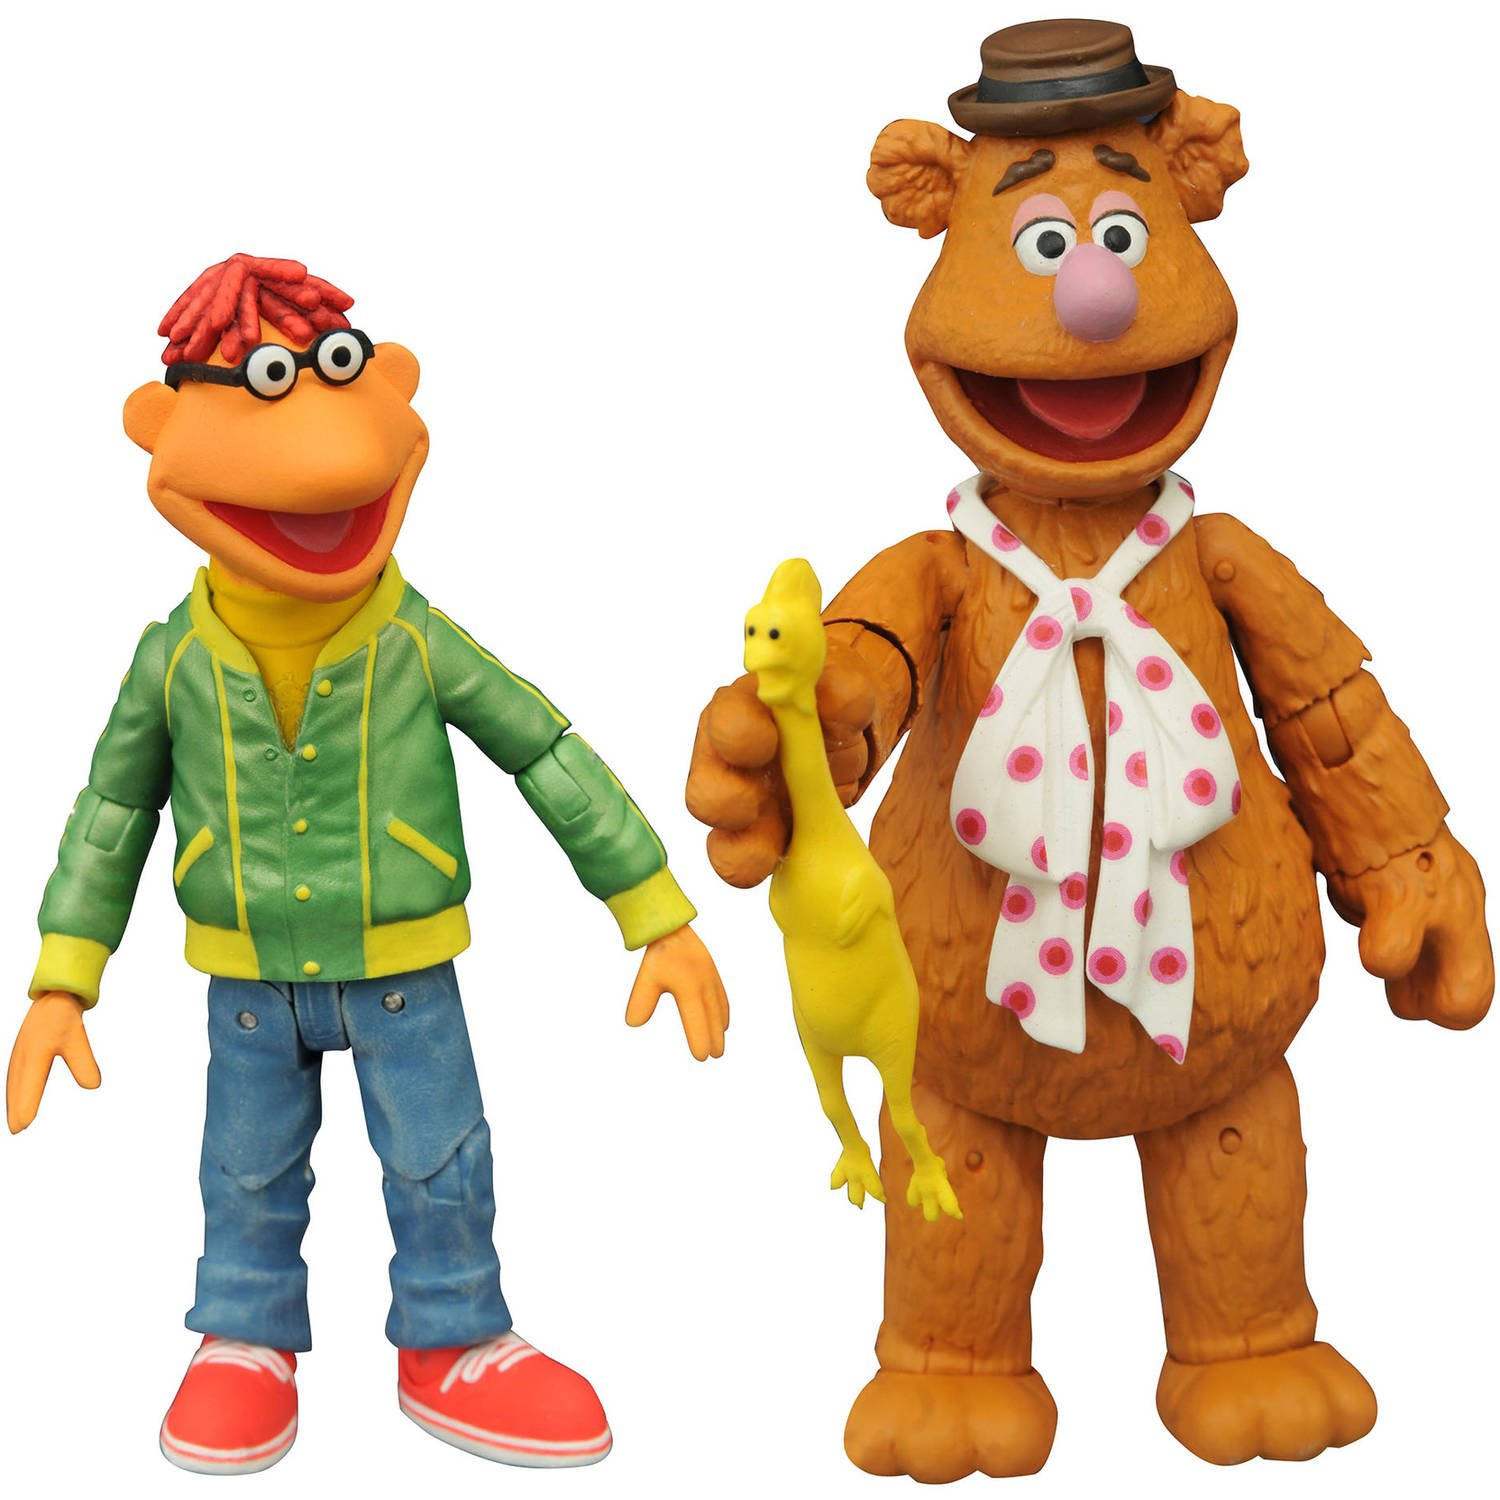 Muppets Fozzie Bear & Scooter Action Figure Playset Collectible Diamond Select Disney Gentle Giant